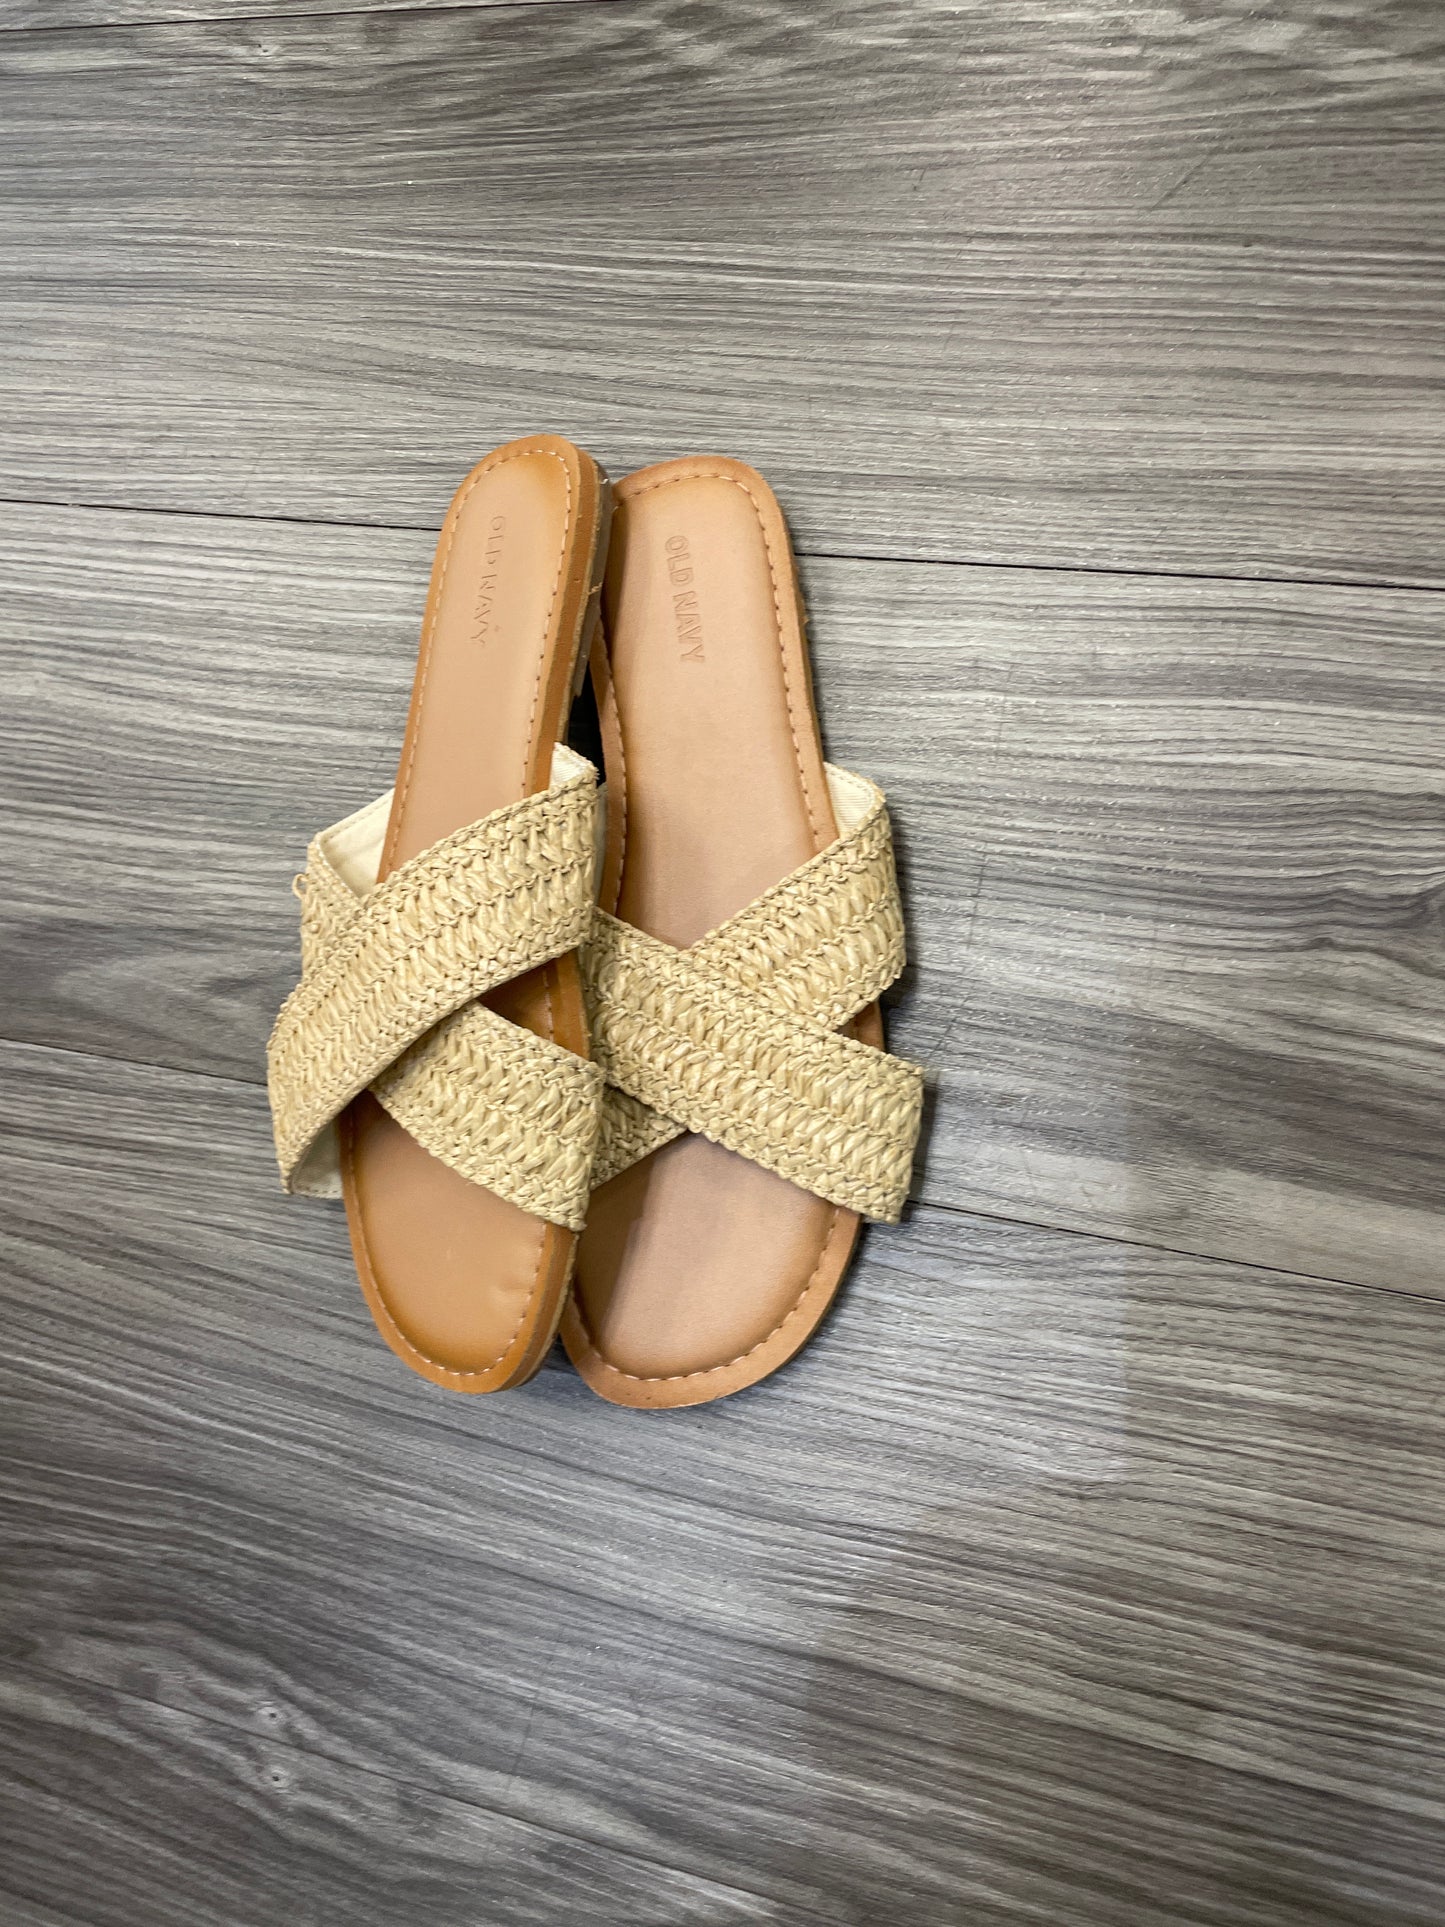 Sandals Flats By Old Navy  Size: 9